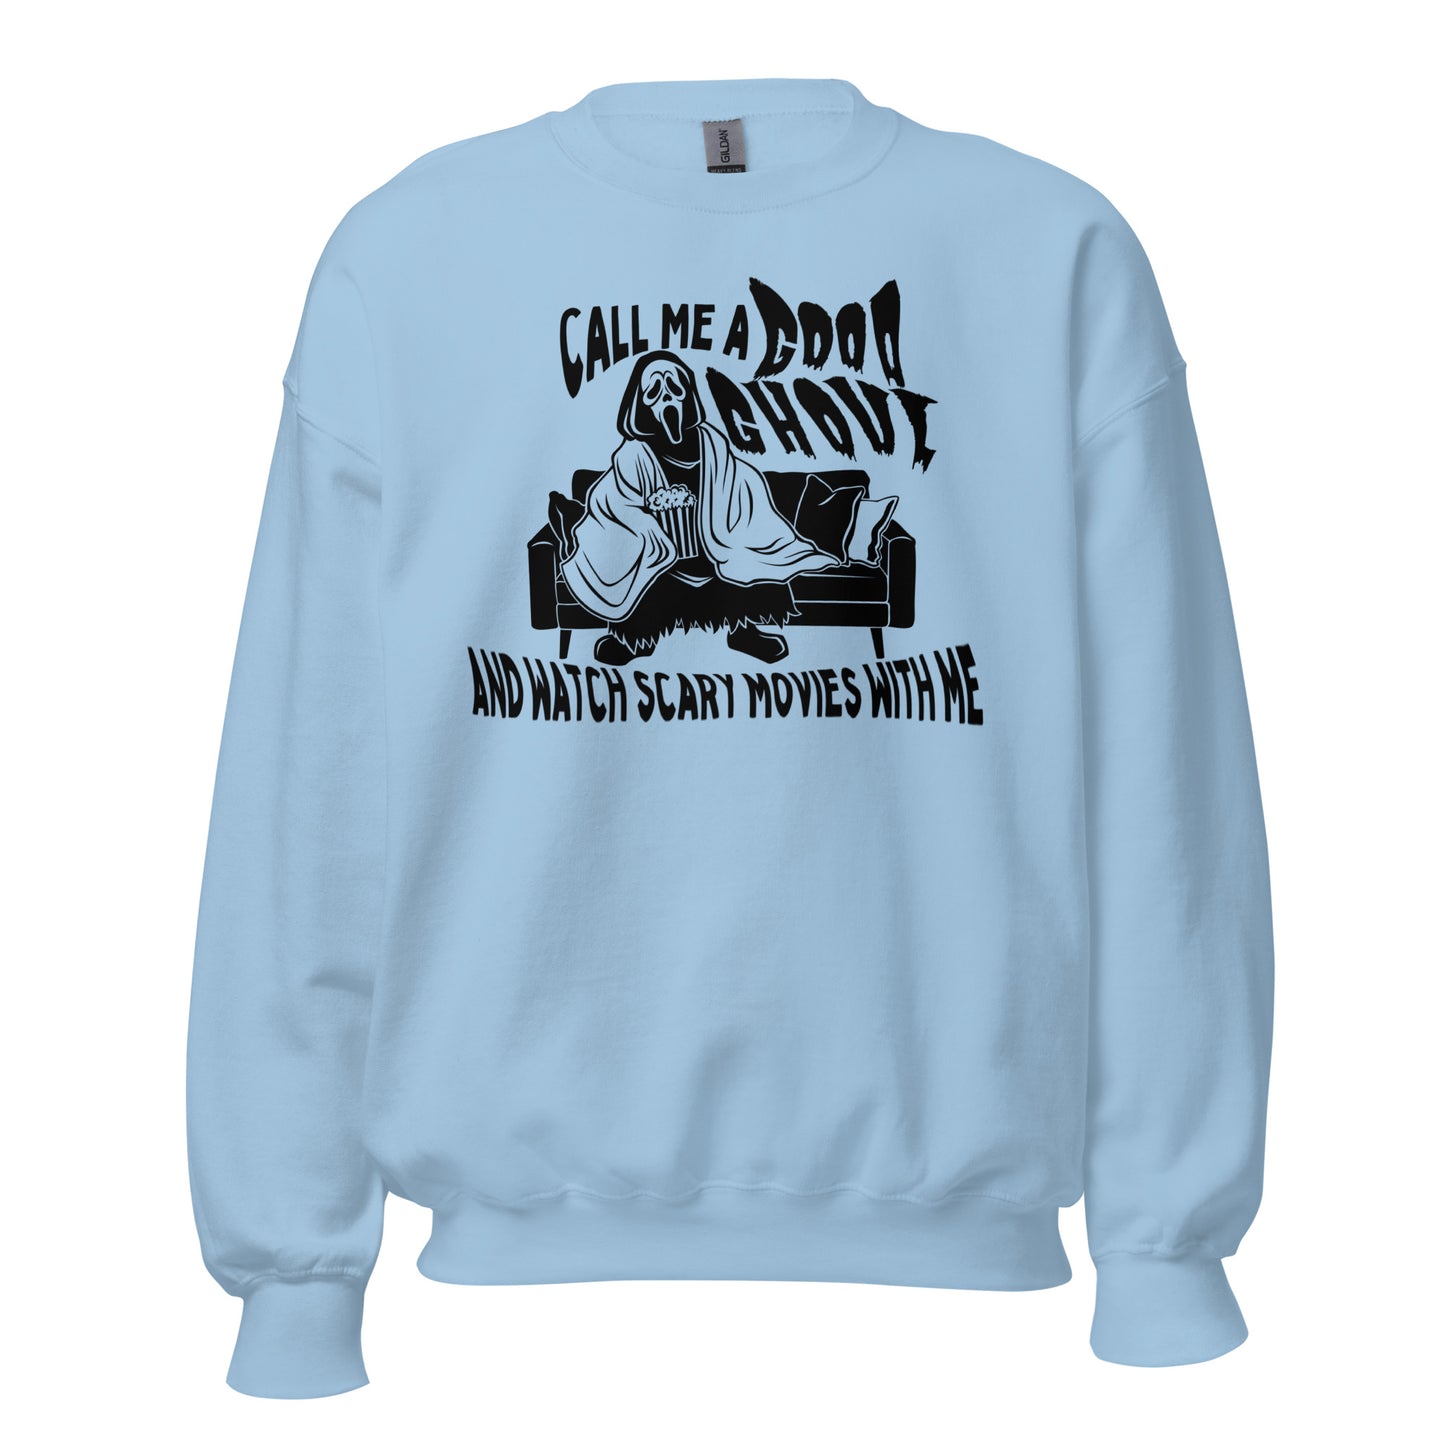 call me a good ghoul and watch scary movies with me sweatshirt (black)